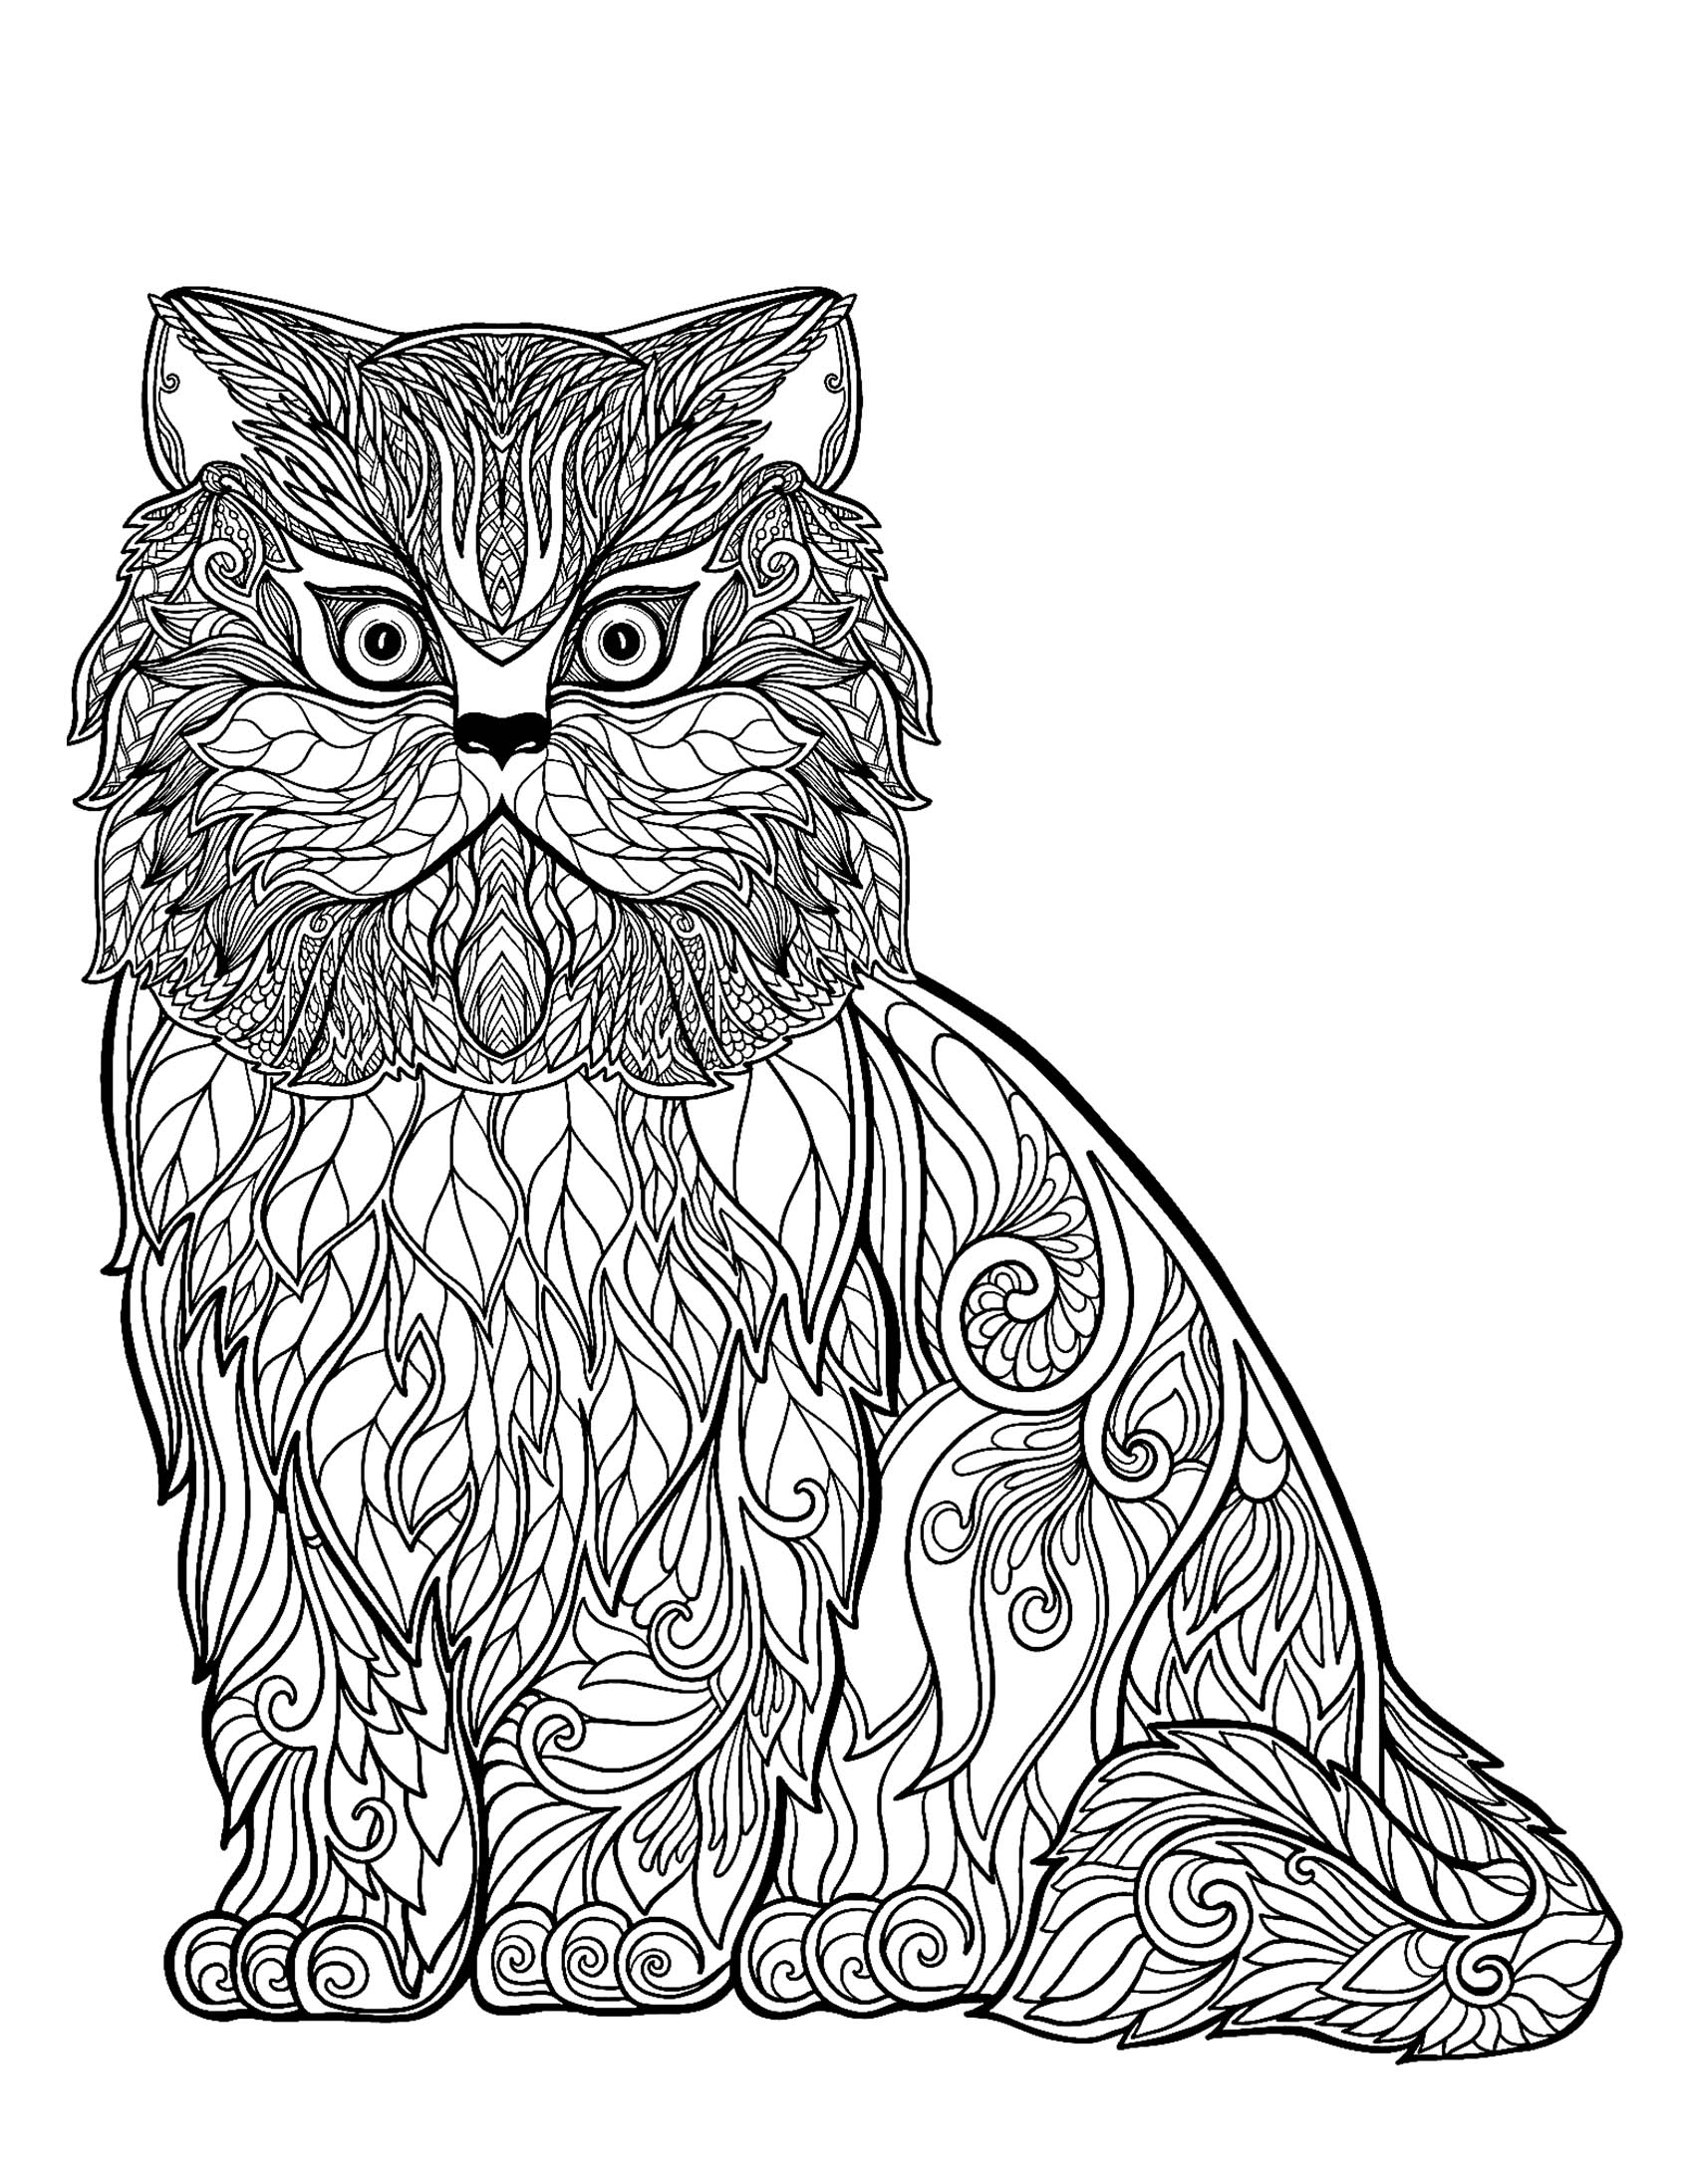 Cat free to color for kids : Wise cat full of details - Cats Kids